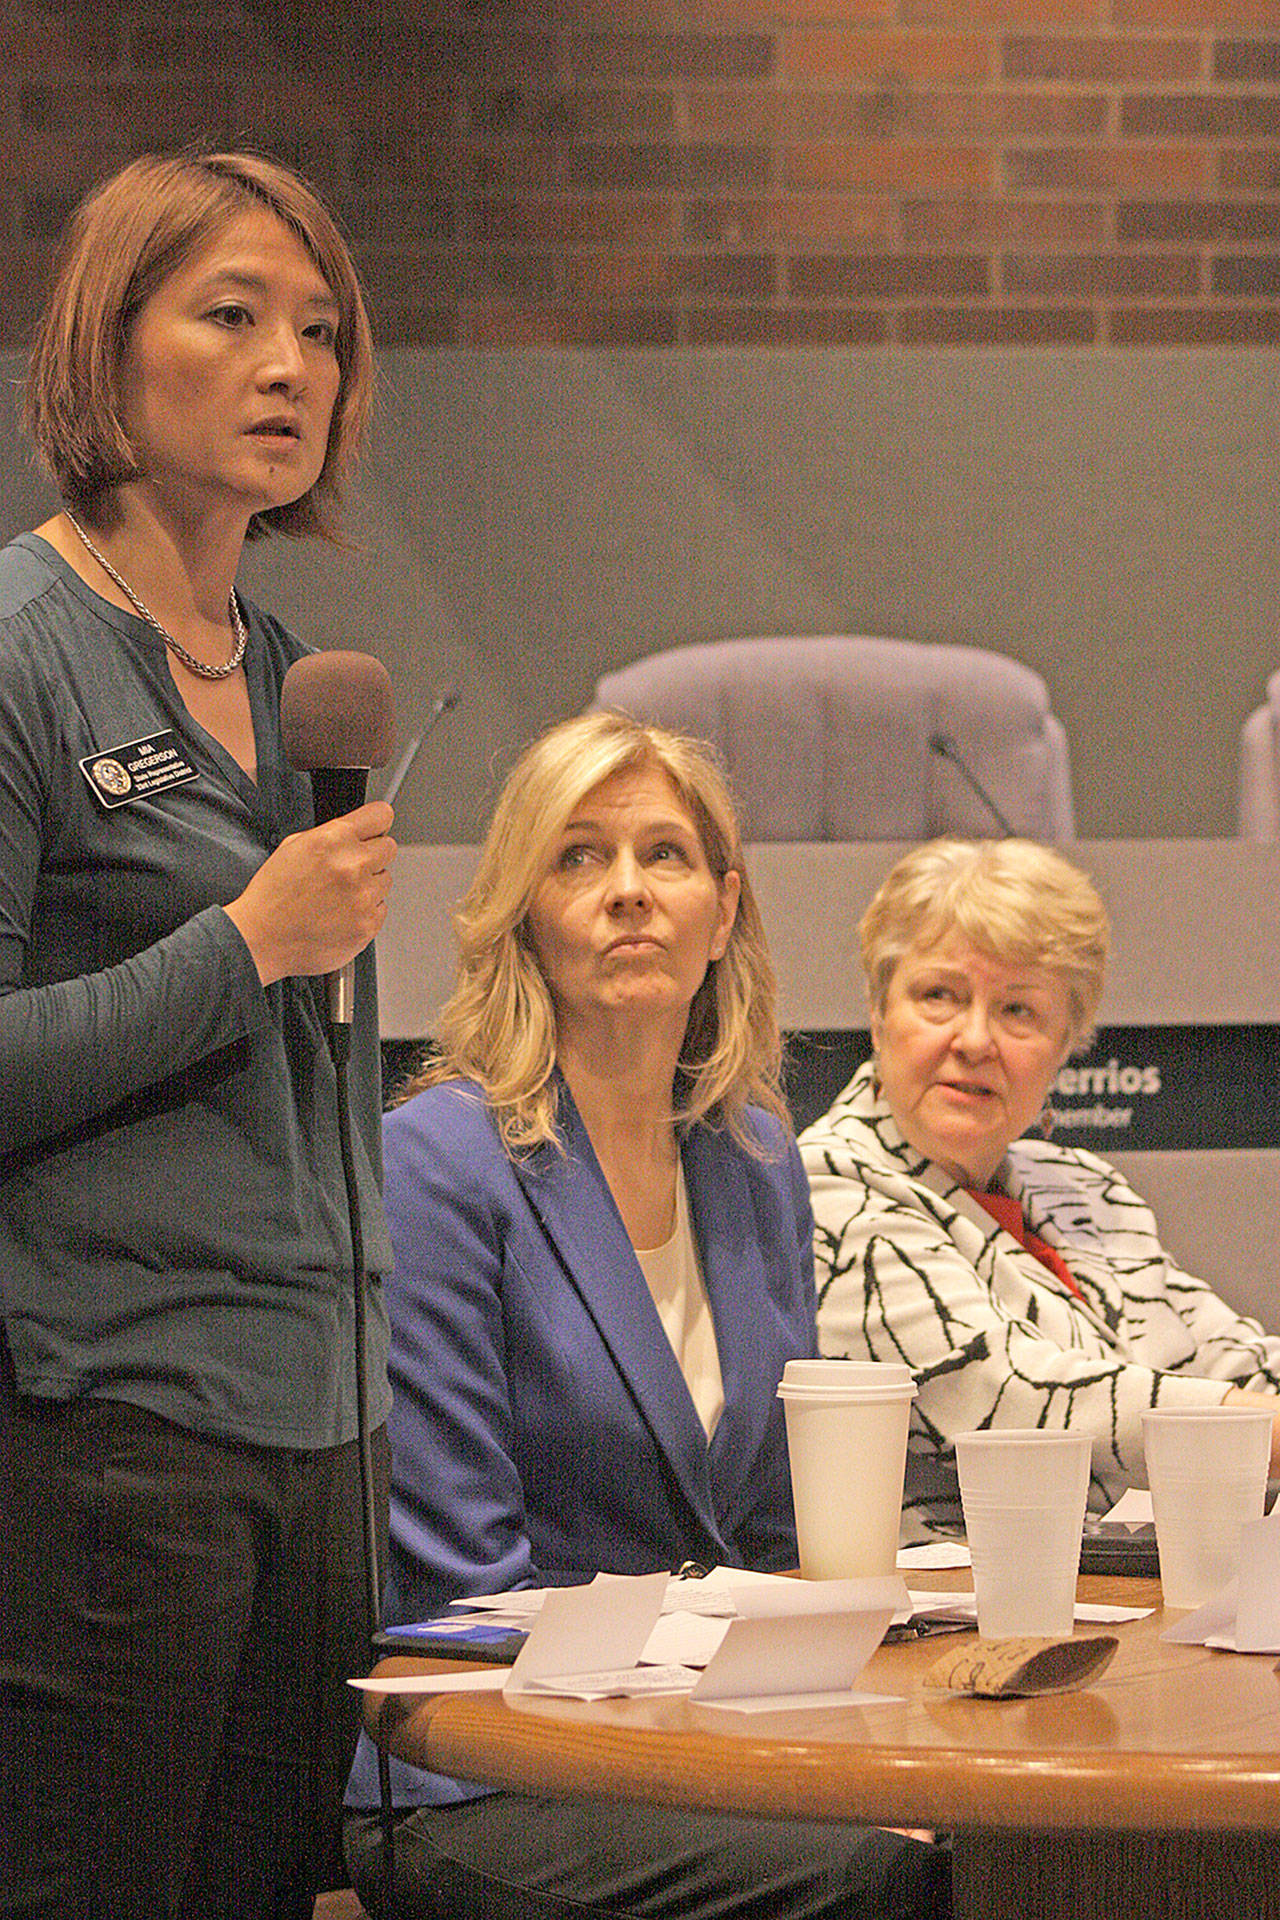 State Rep. Mia Gregerson, D-SeaTac, answers a question as Rep. Tina Orwell, D-Des Moines, middle, and Sen. Karen Keiser, D-Kent, listen during the town hall meeting at Kent City Hall last Saturday. MARK KLAAS, Kent Reporter